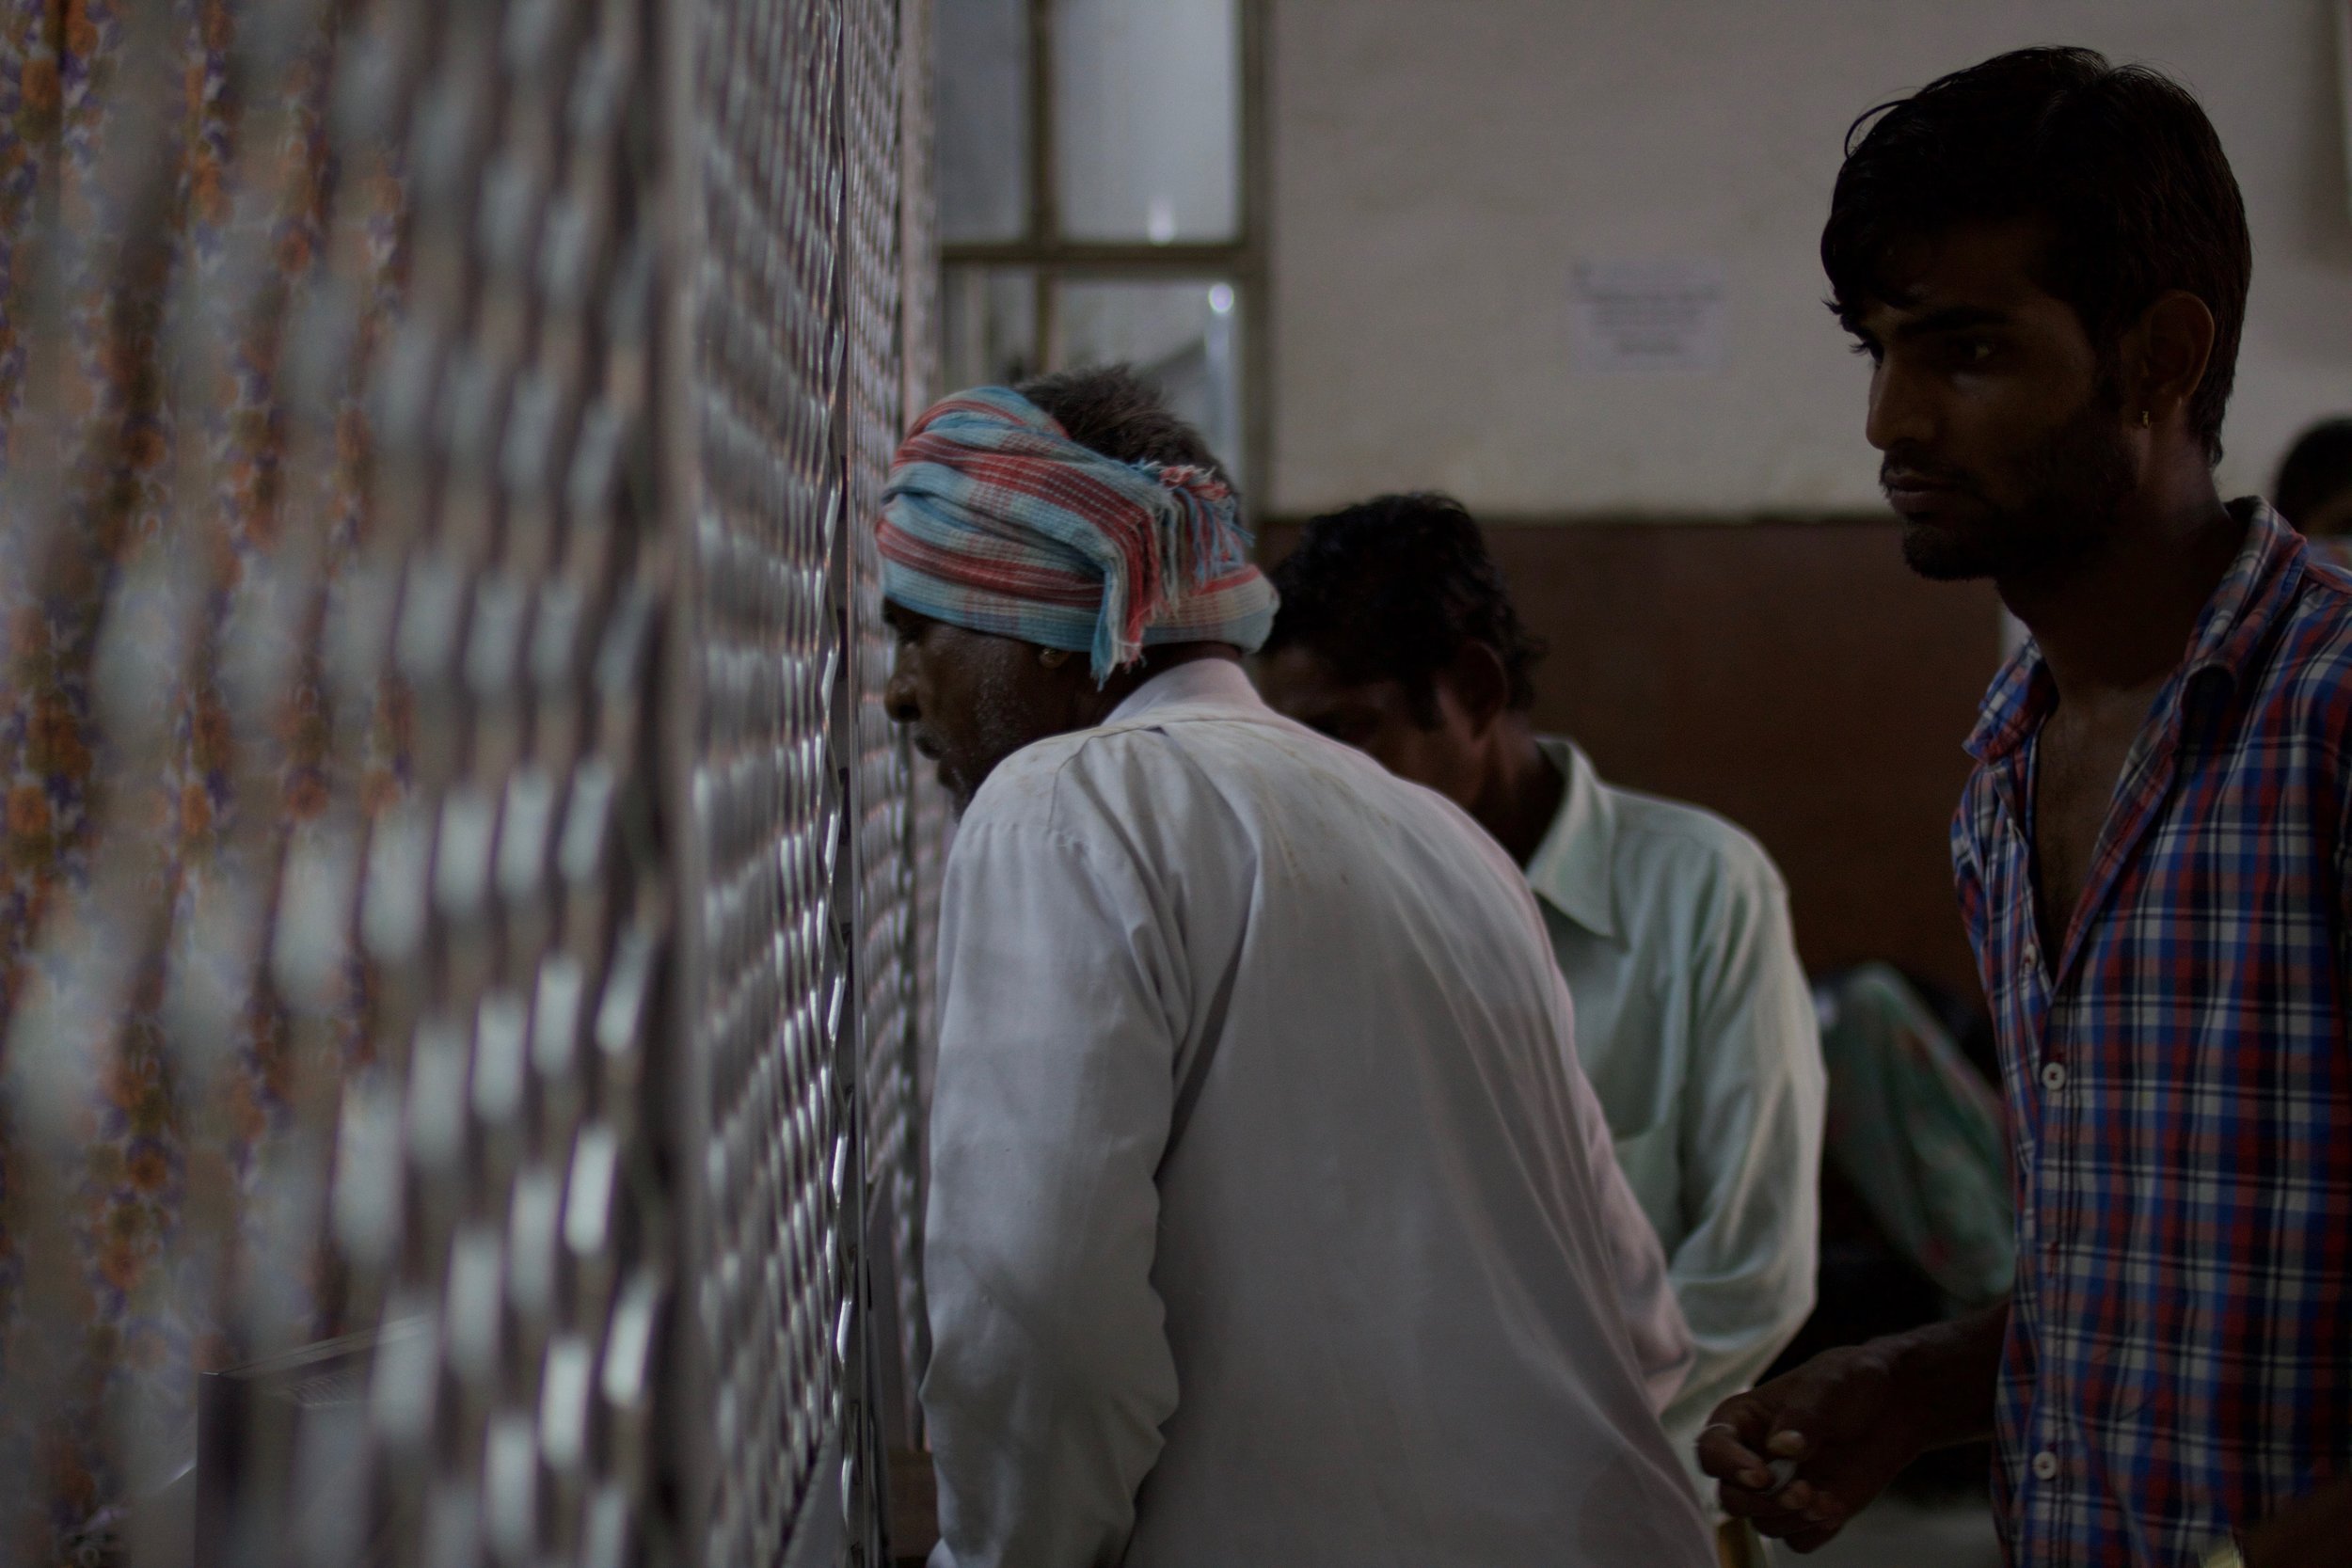  An elderly man approaches the Drug Distribution Counter at the MB Hospital for his monthly medicines. 